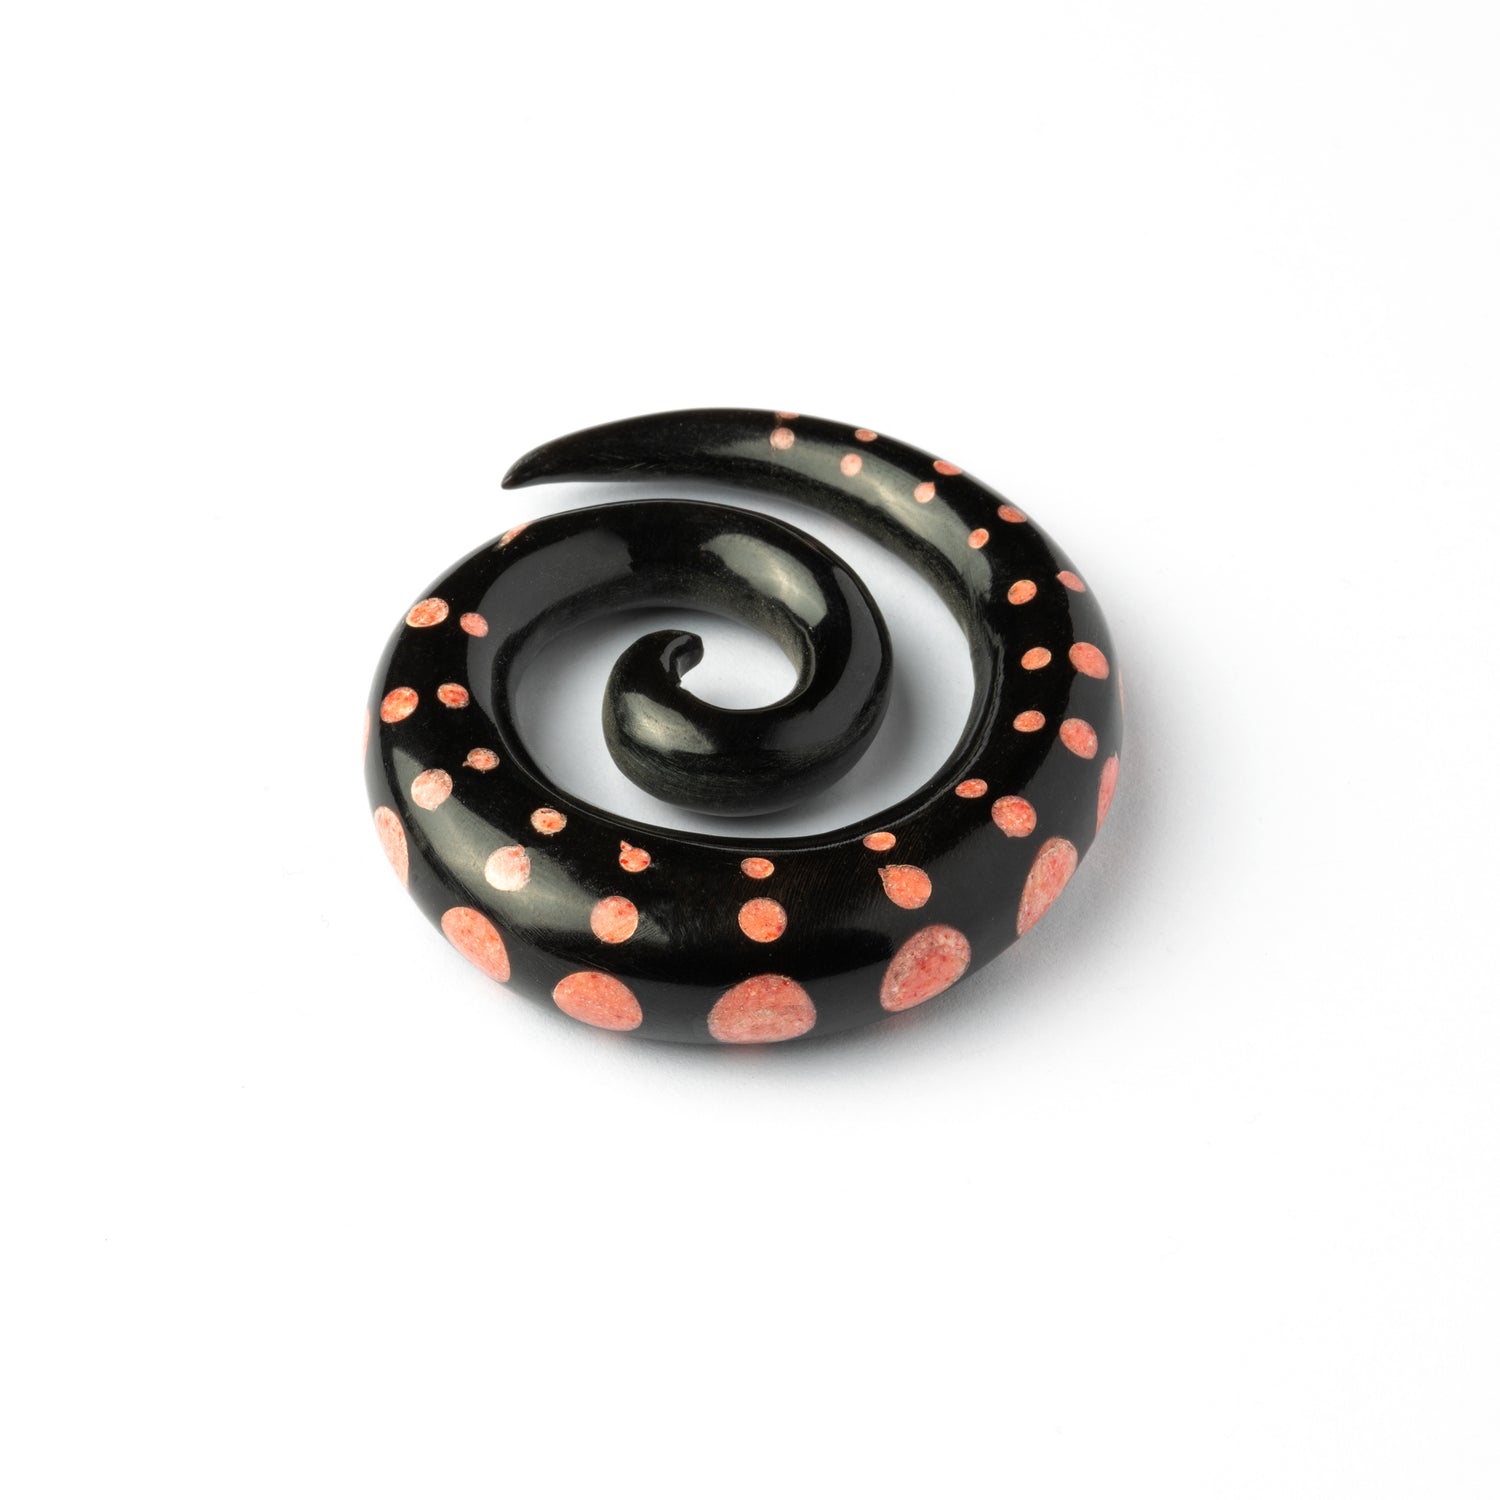 Dotted Spiral Gauges with Stone Inlay